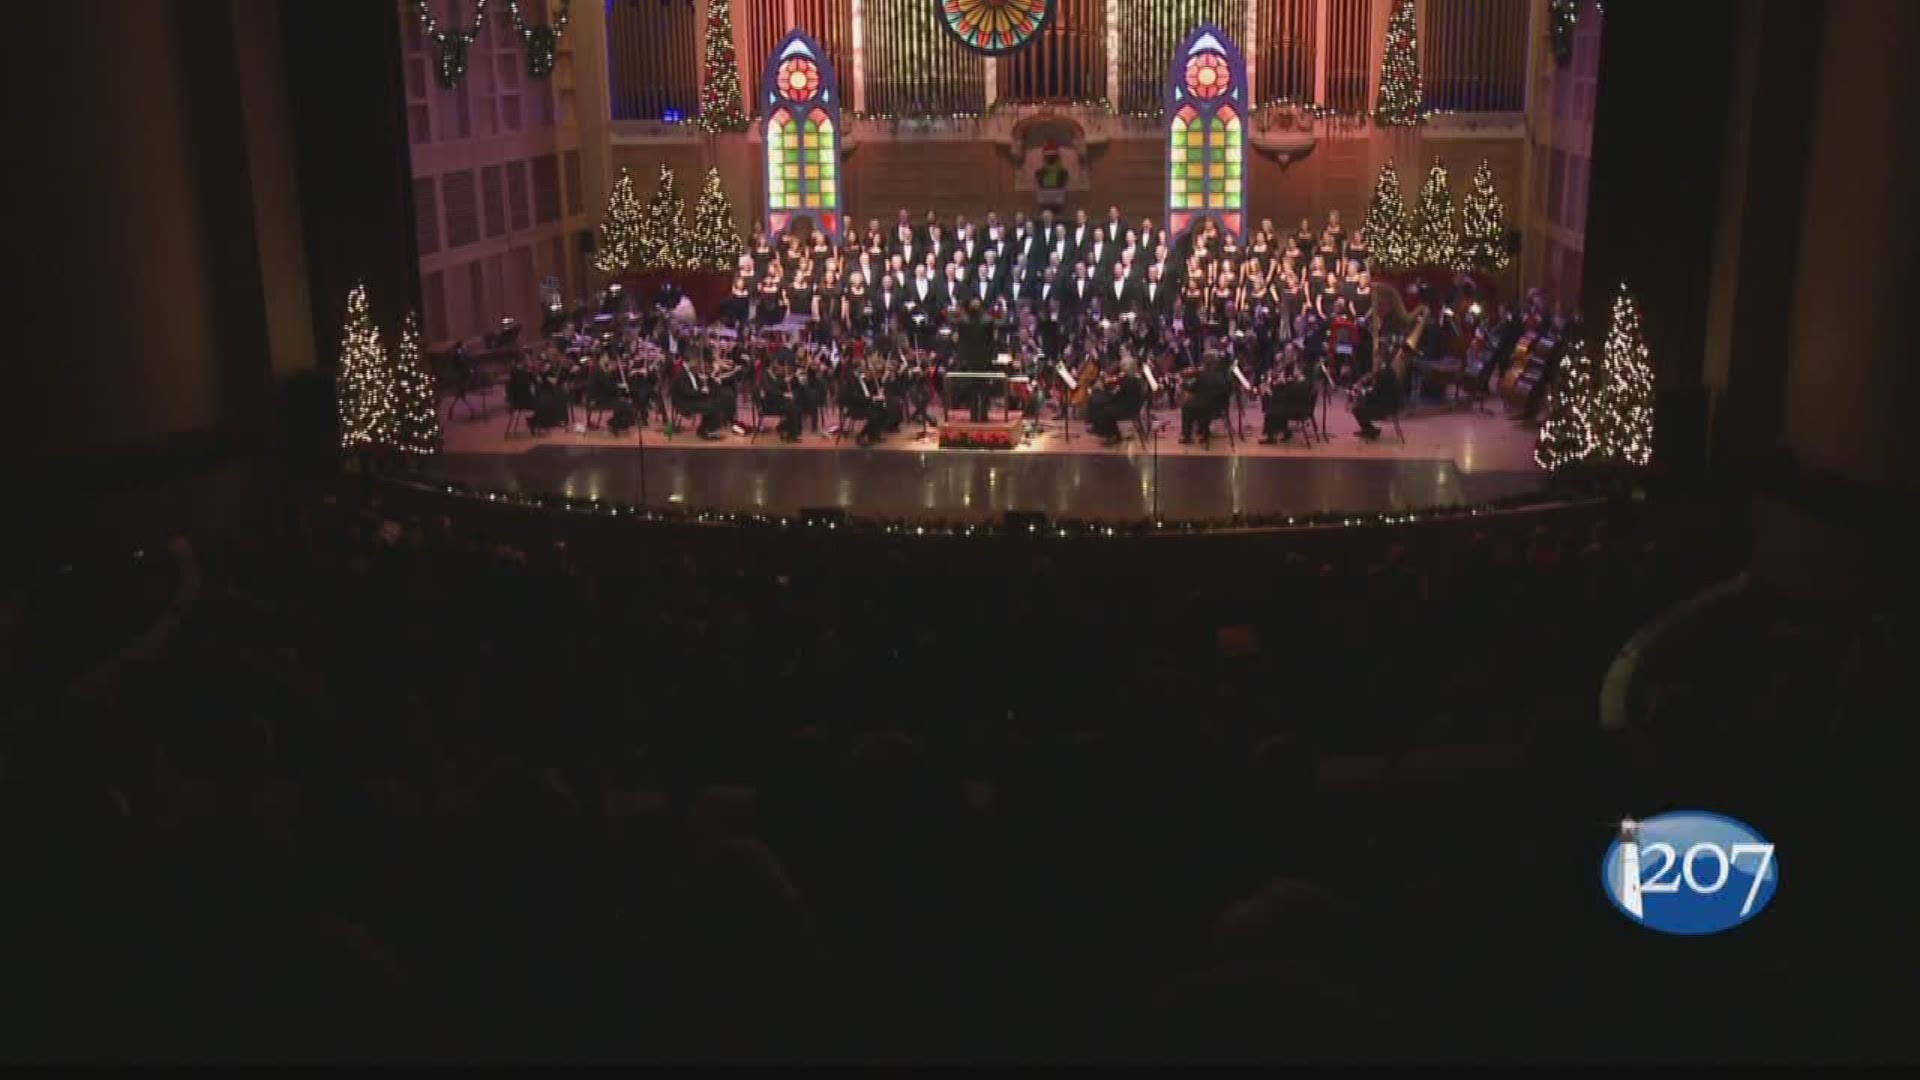 The Portland Symphony Orchestra's Magic of Christmas